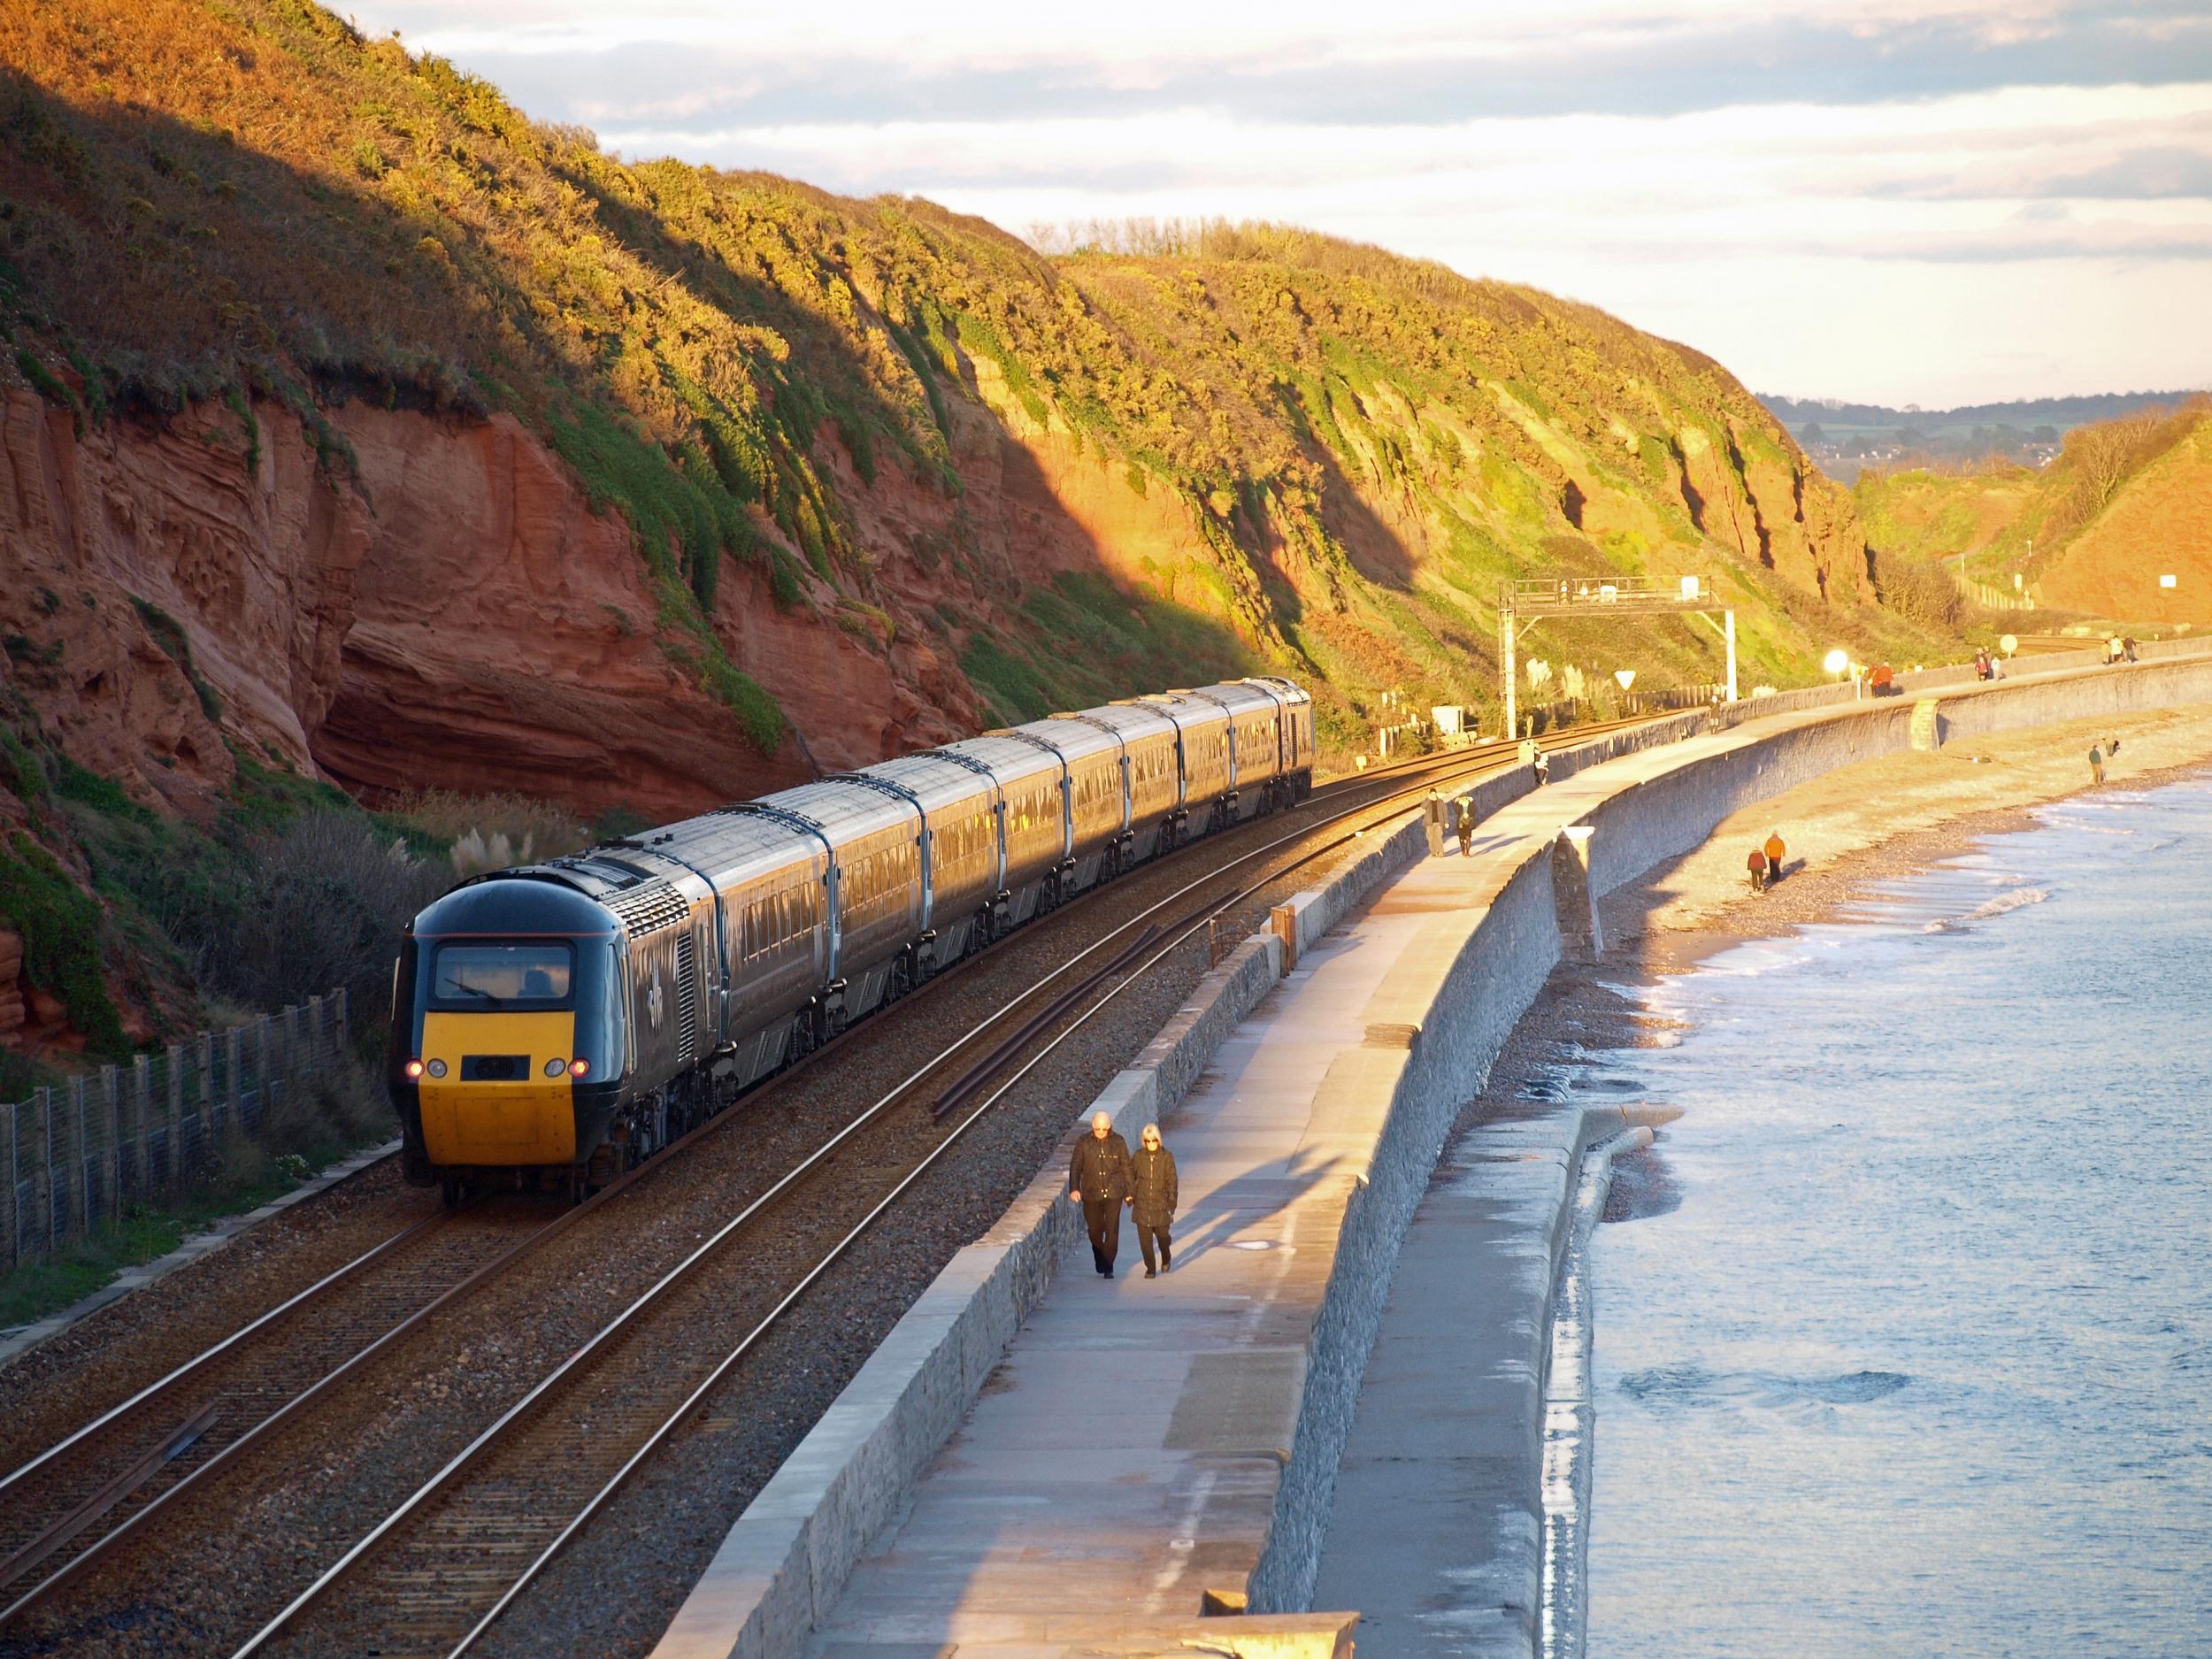 The Great Western Railway covers much of the south west